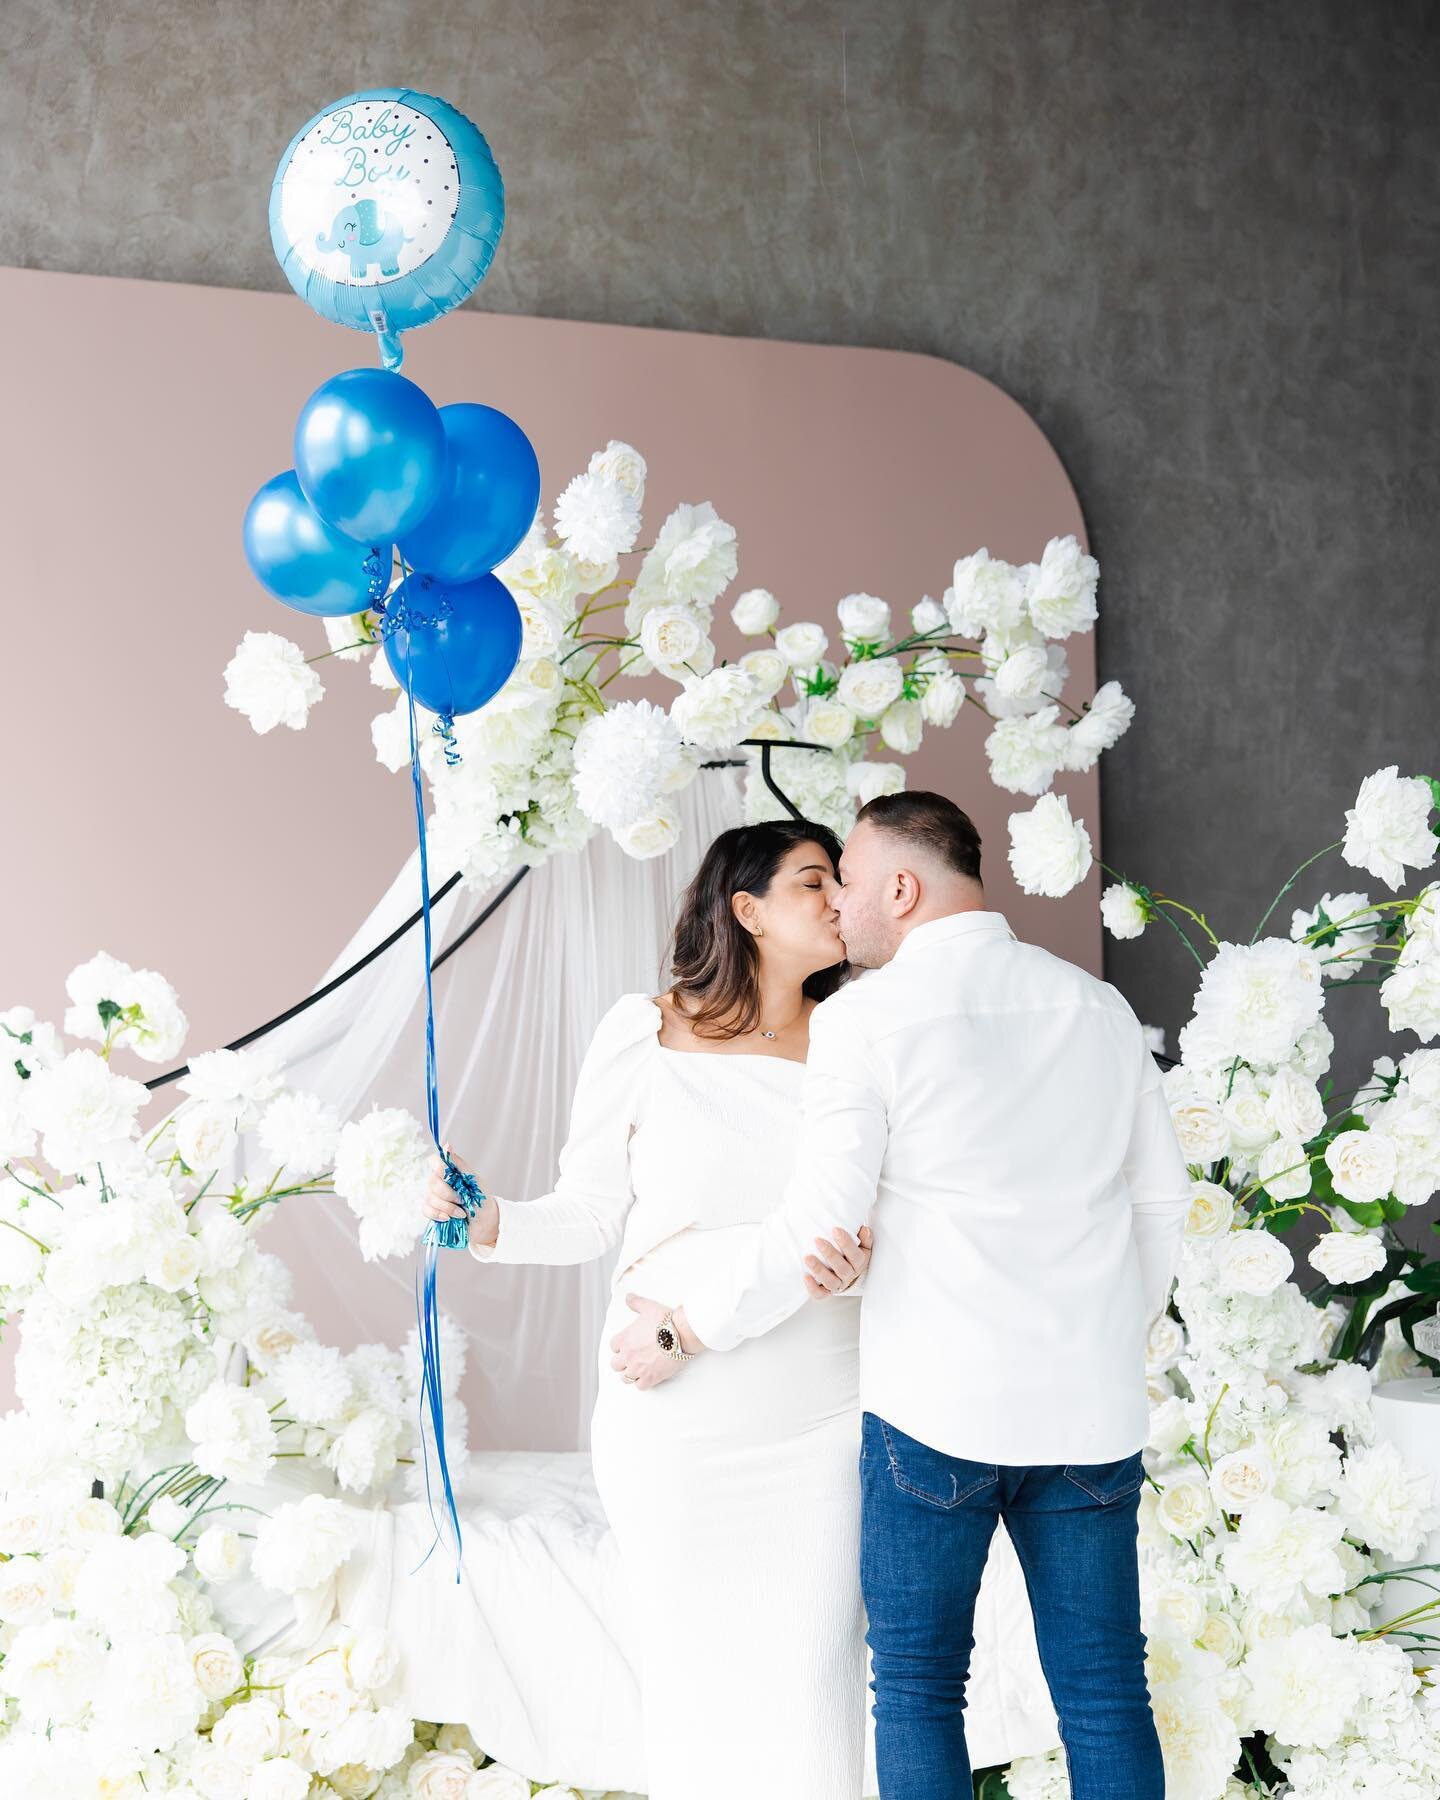 🙏🤗 We are so thankful to Yelda for trusting us to capture her special gender reveal during her maternity session! It was an honor having her family join via Zoom, and we were able to capture such a beautiful moment that they can cherish forever. Th